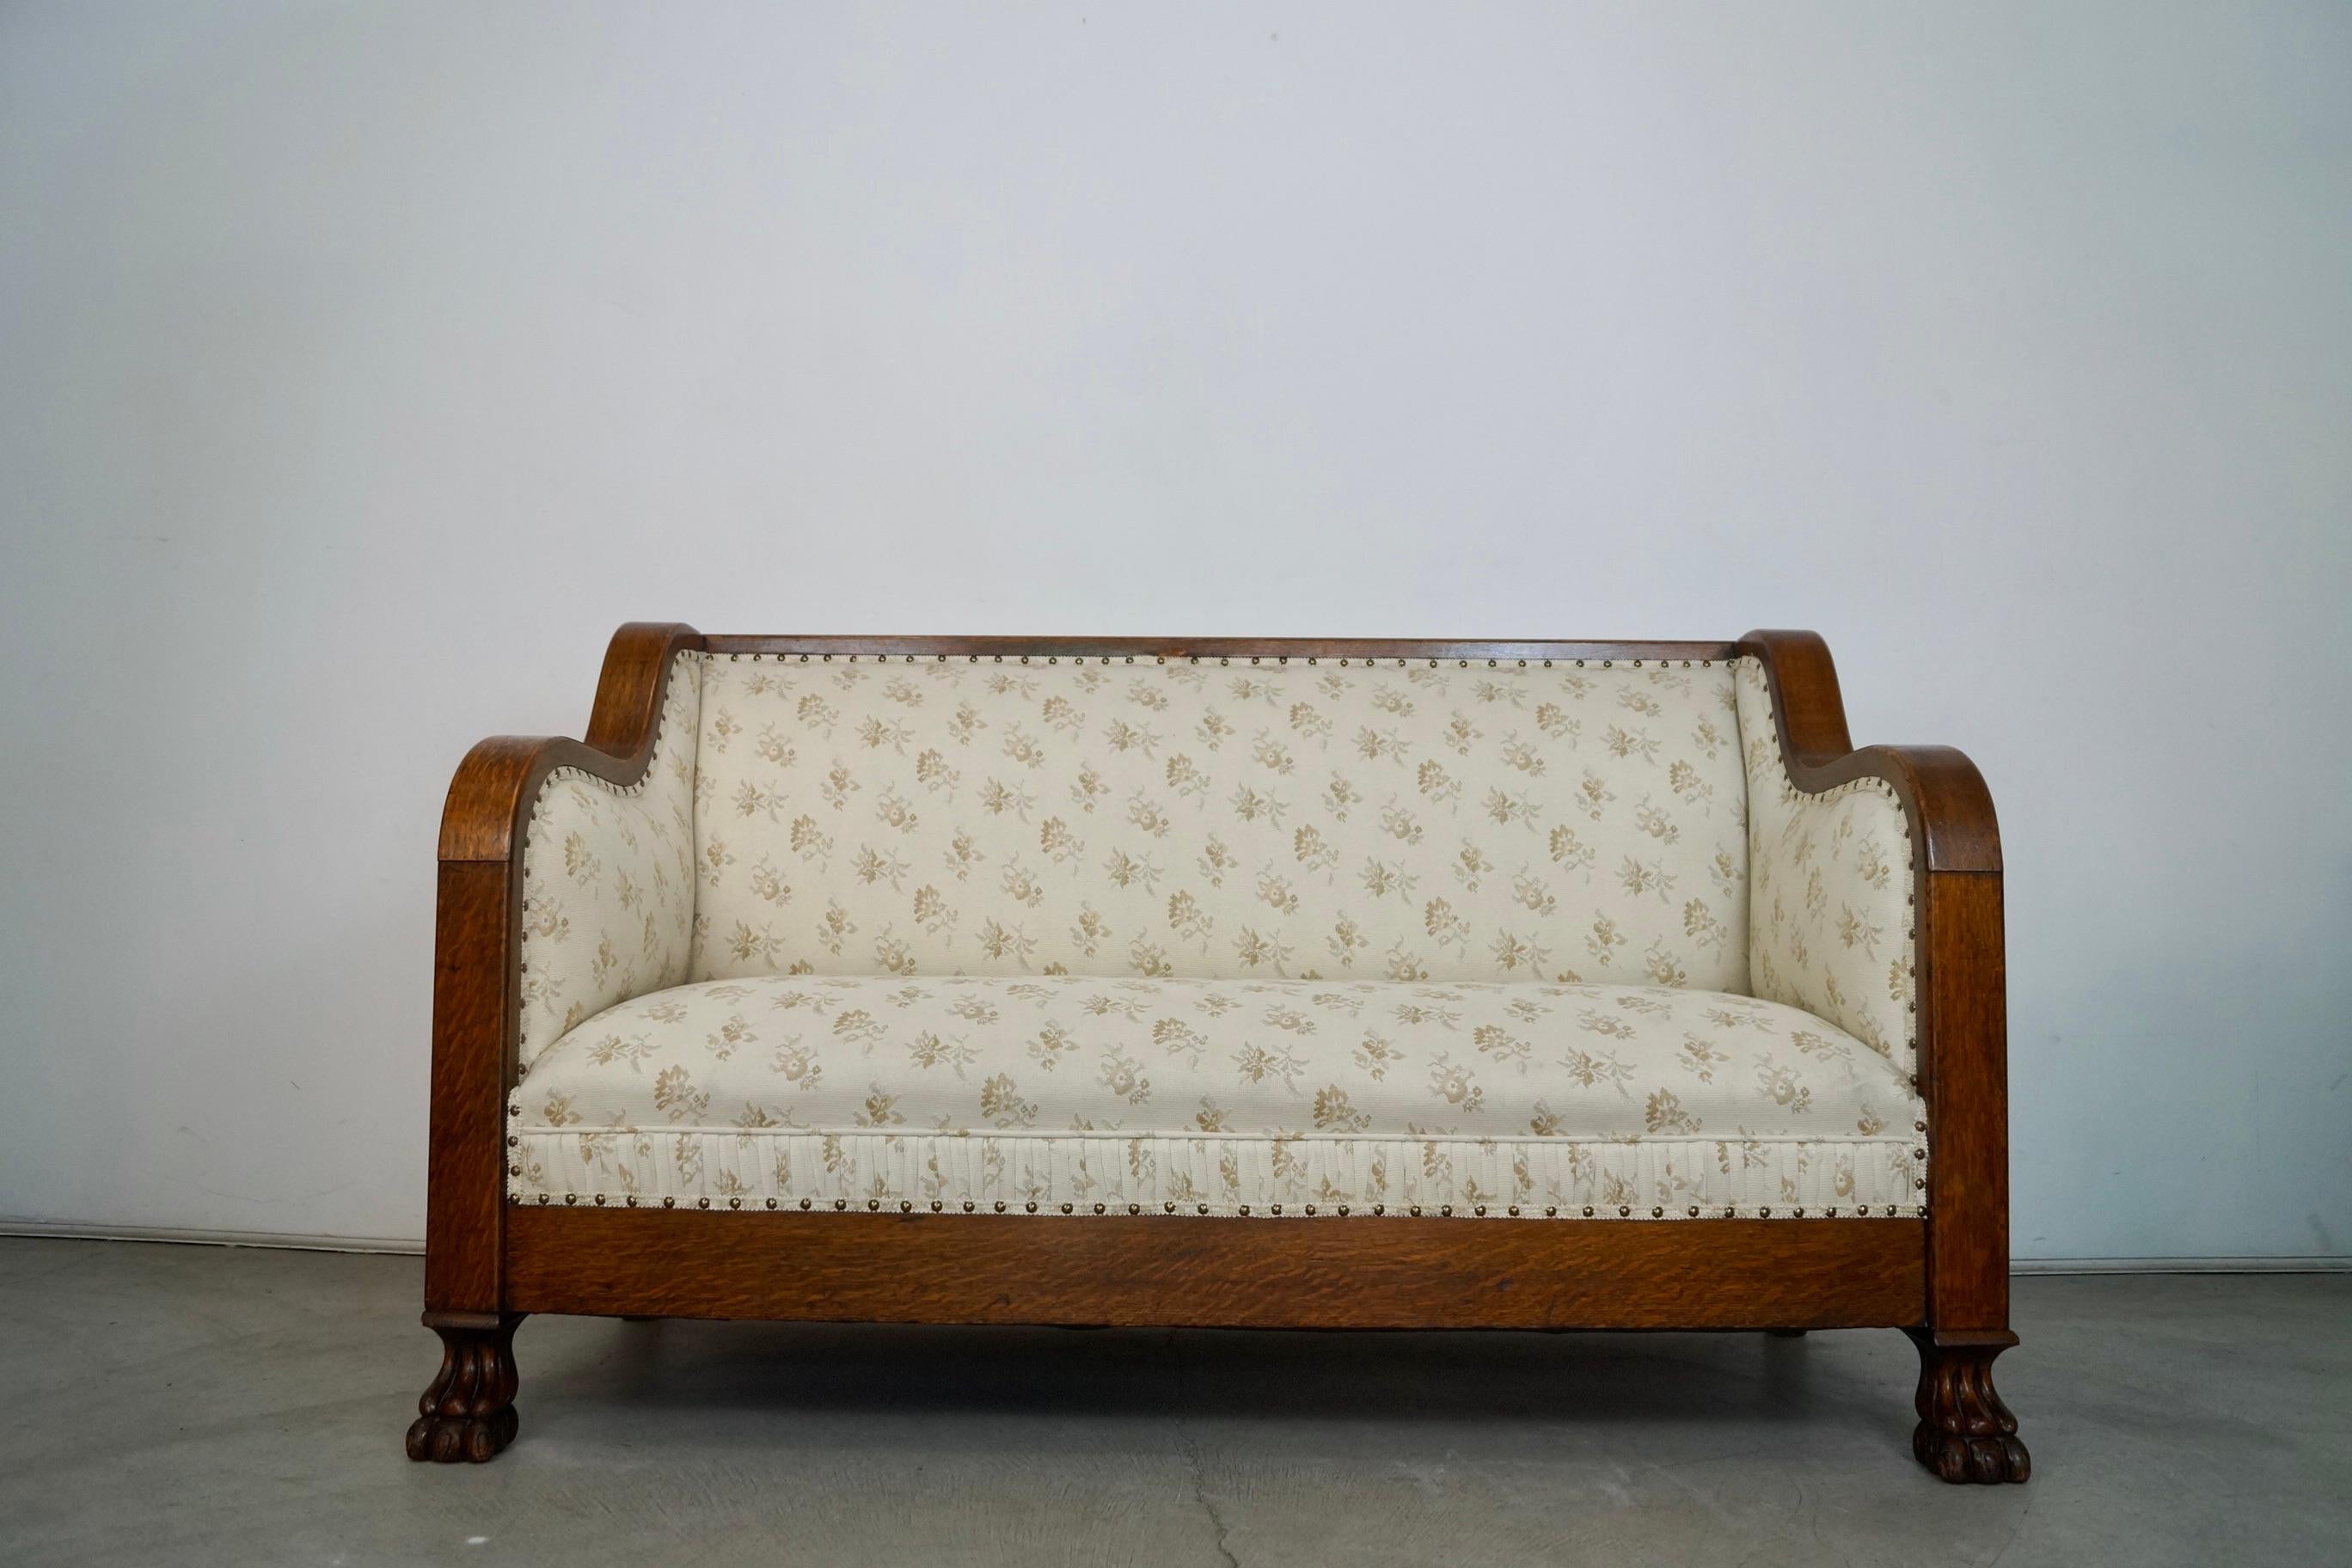 Antique Craftsman couch for sale. Over 100 years ago, and in excellent condition. Has a solid quarter sawn oak frame in a dark oak finish, and a vintage floral upholstery with solid brass nailheads. Beautiful quarter sawn oak trim with ball claws